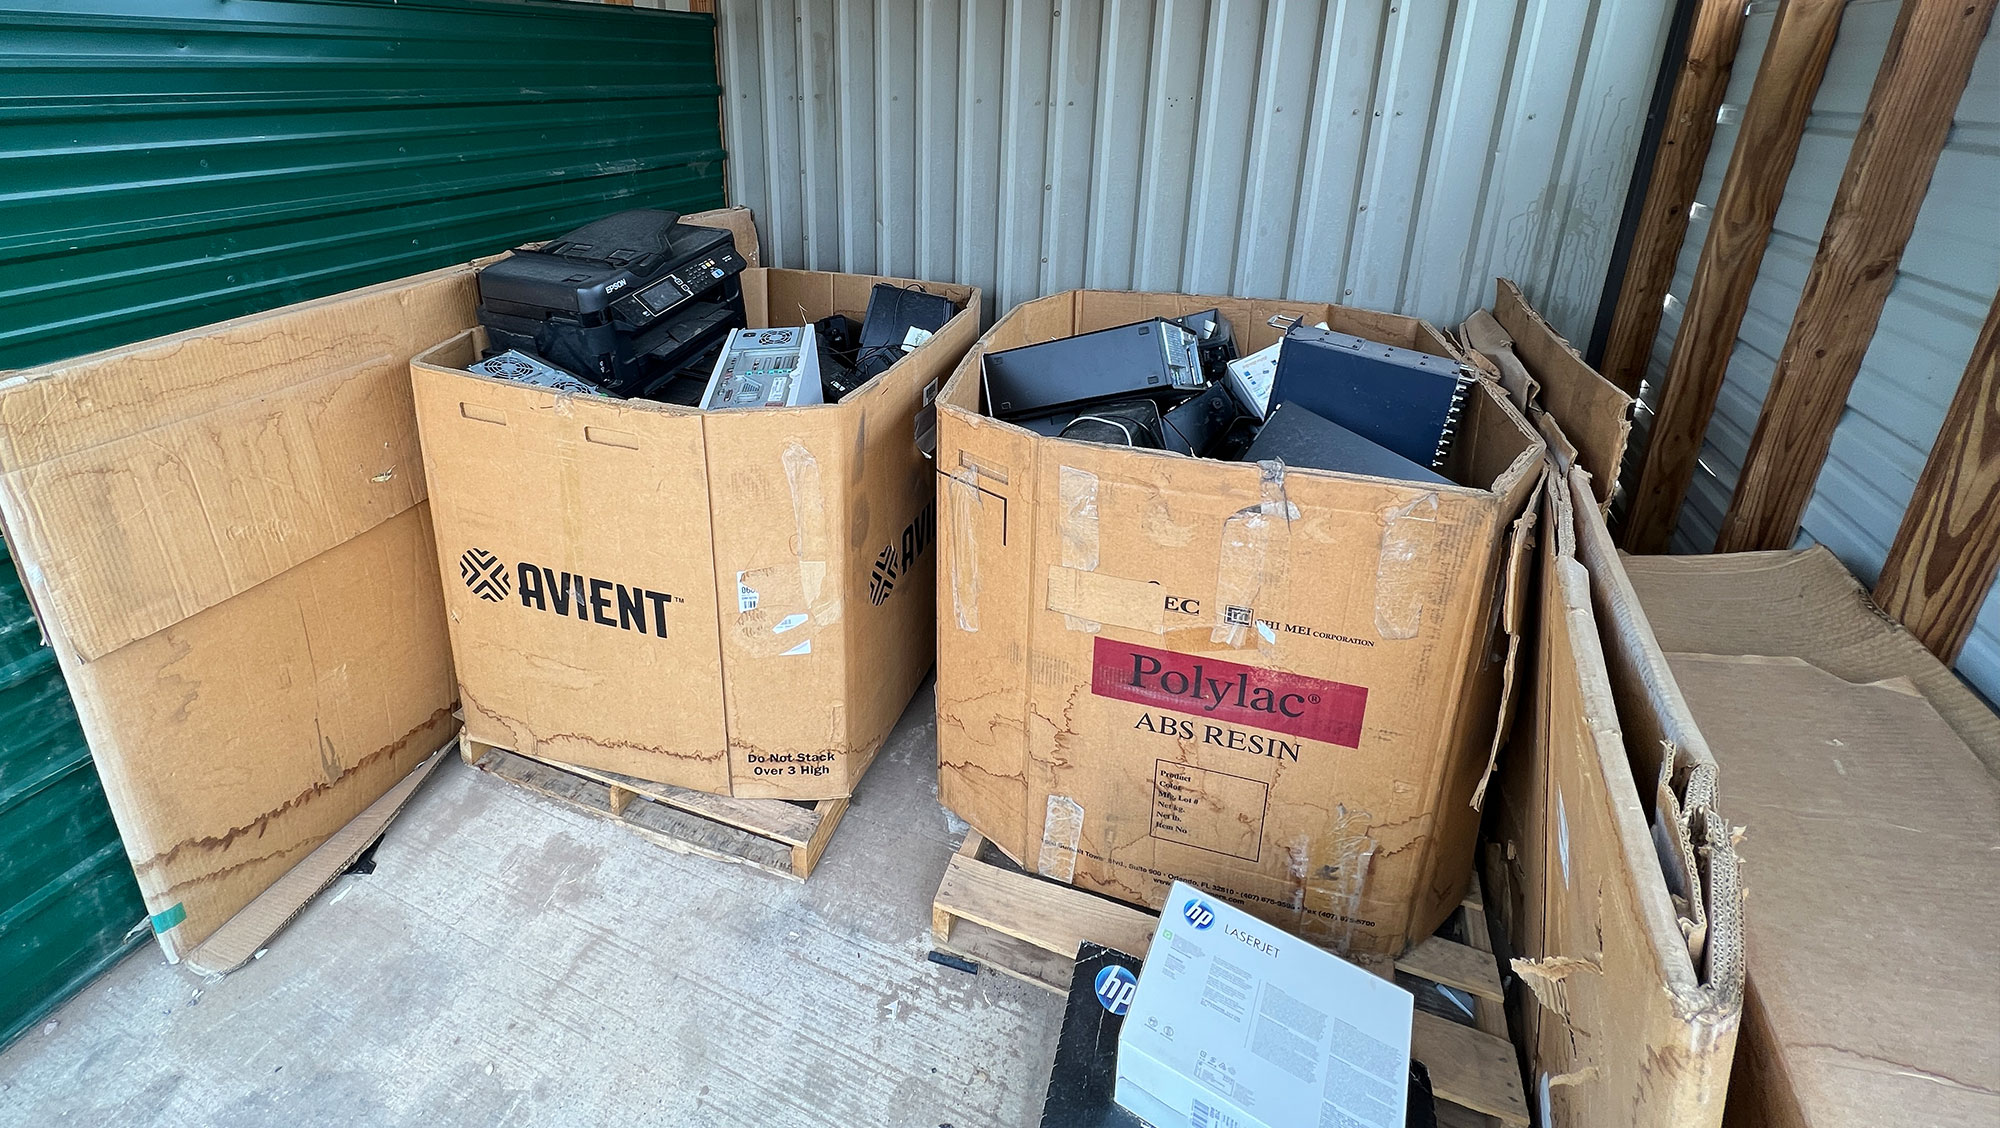 Two boxes of electronic waste sit on pallets ready to be recycled